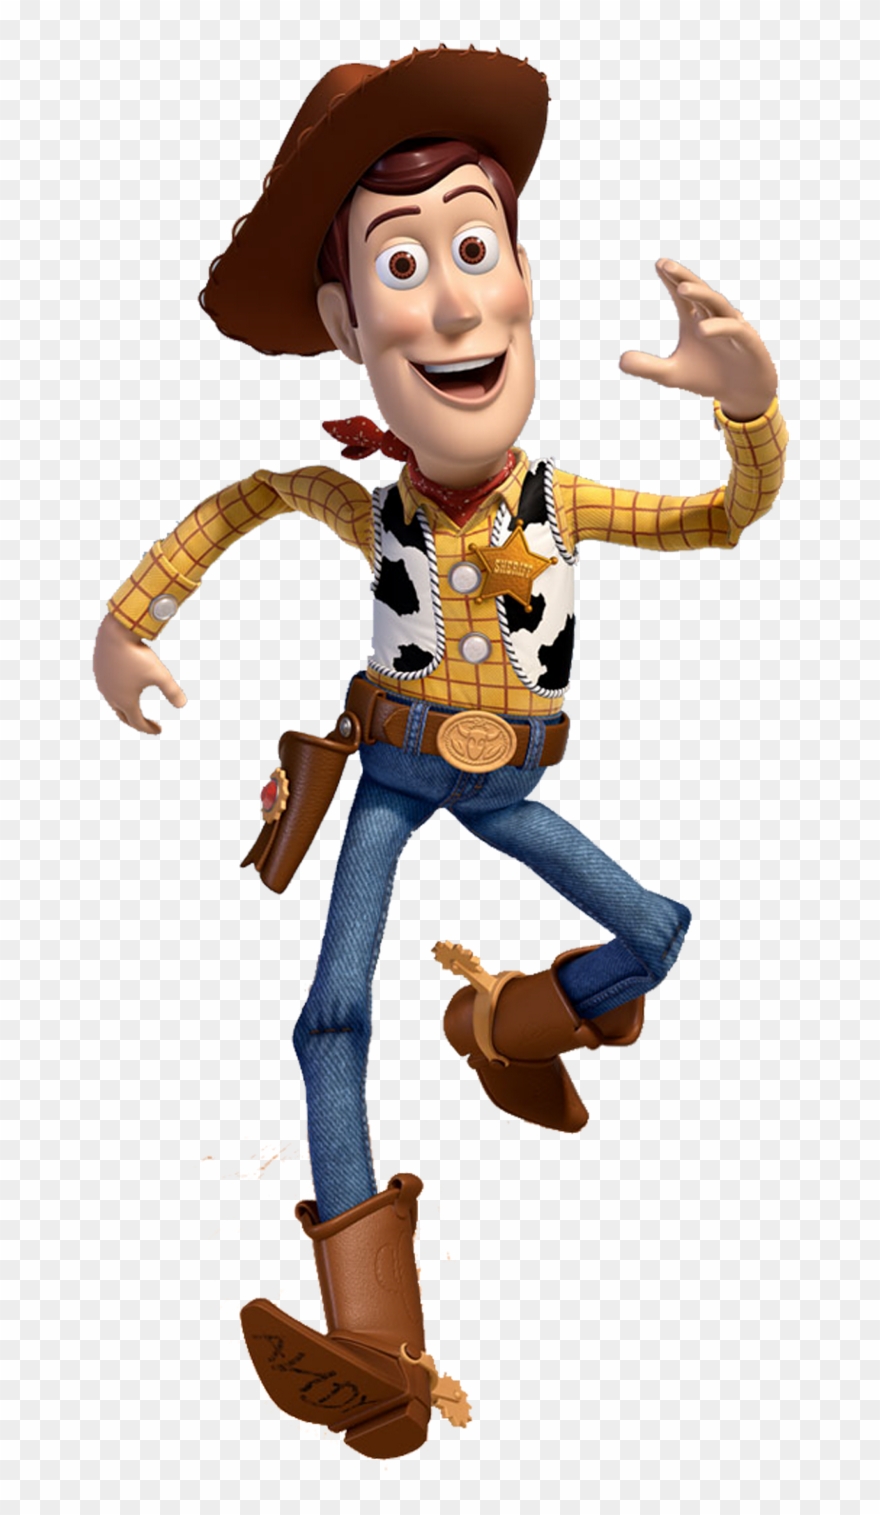 Woody toy story.